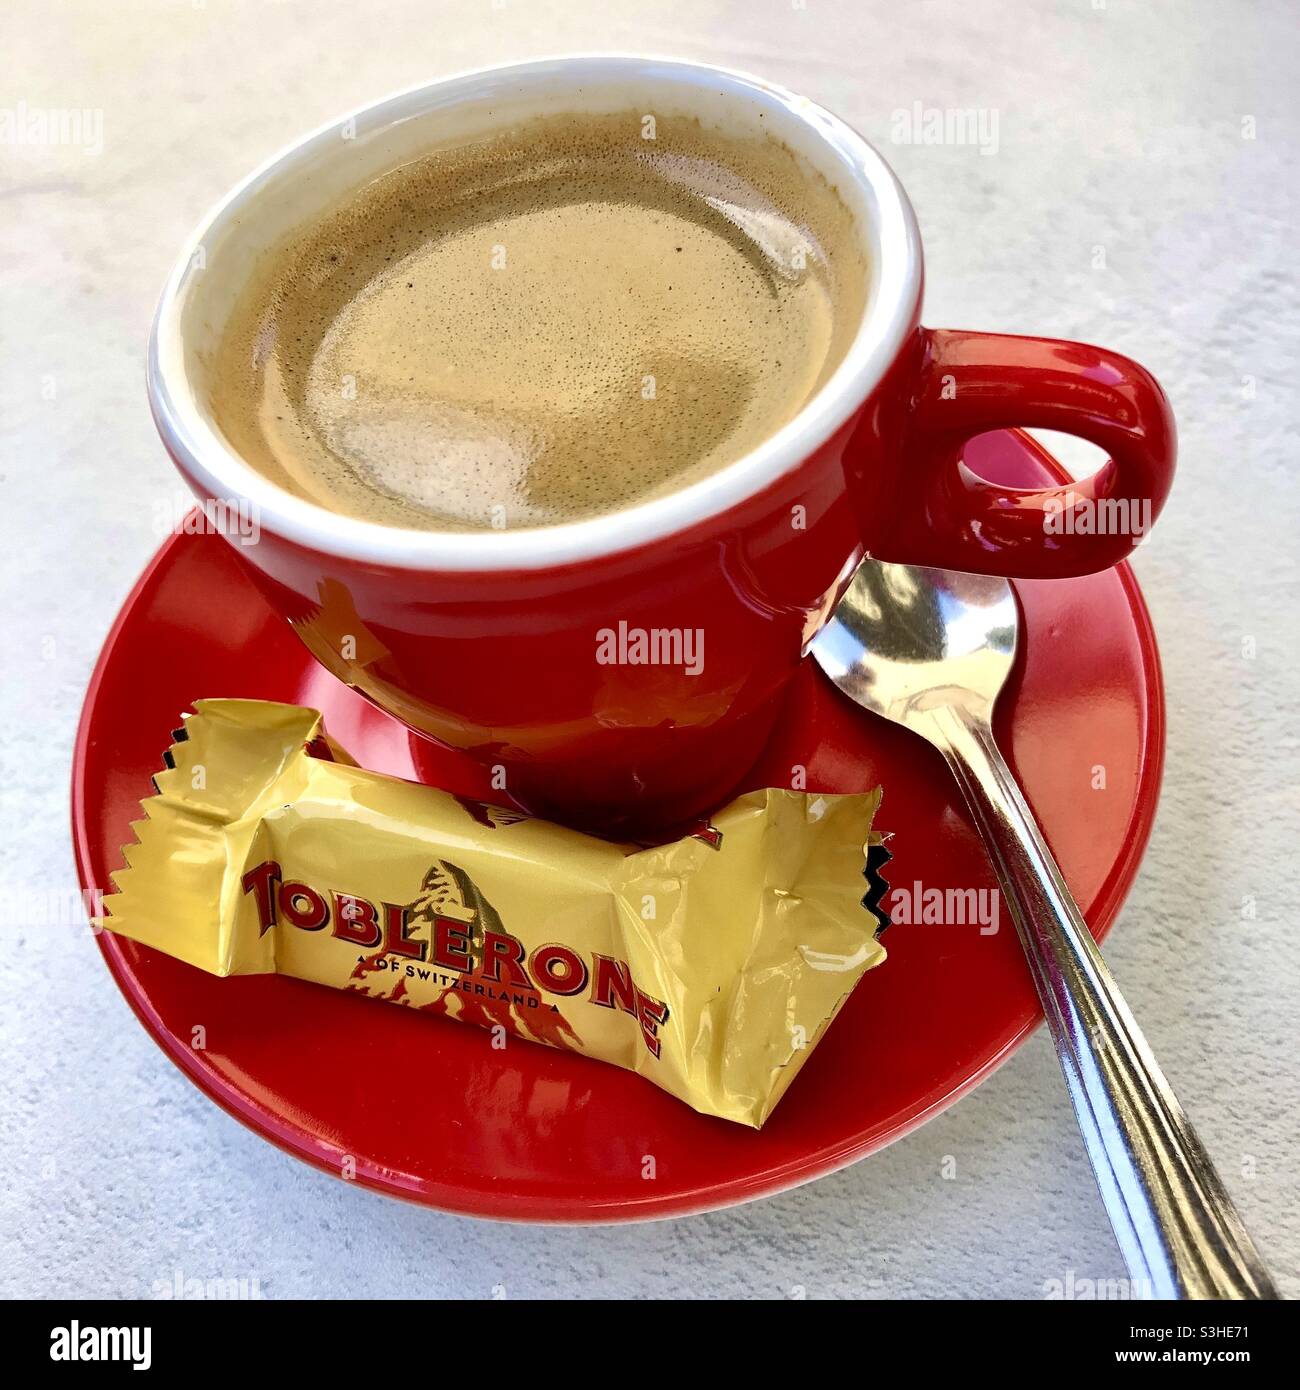 Cup of fresh coffee with a free miniature Toblerone taster. Stock Photo